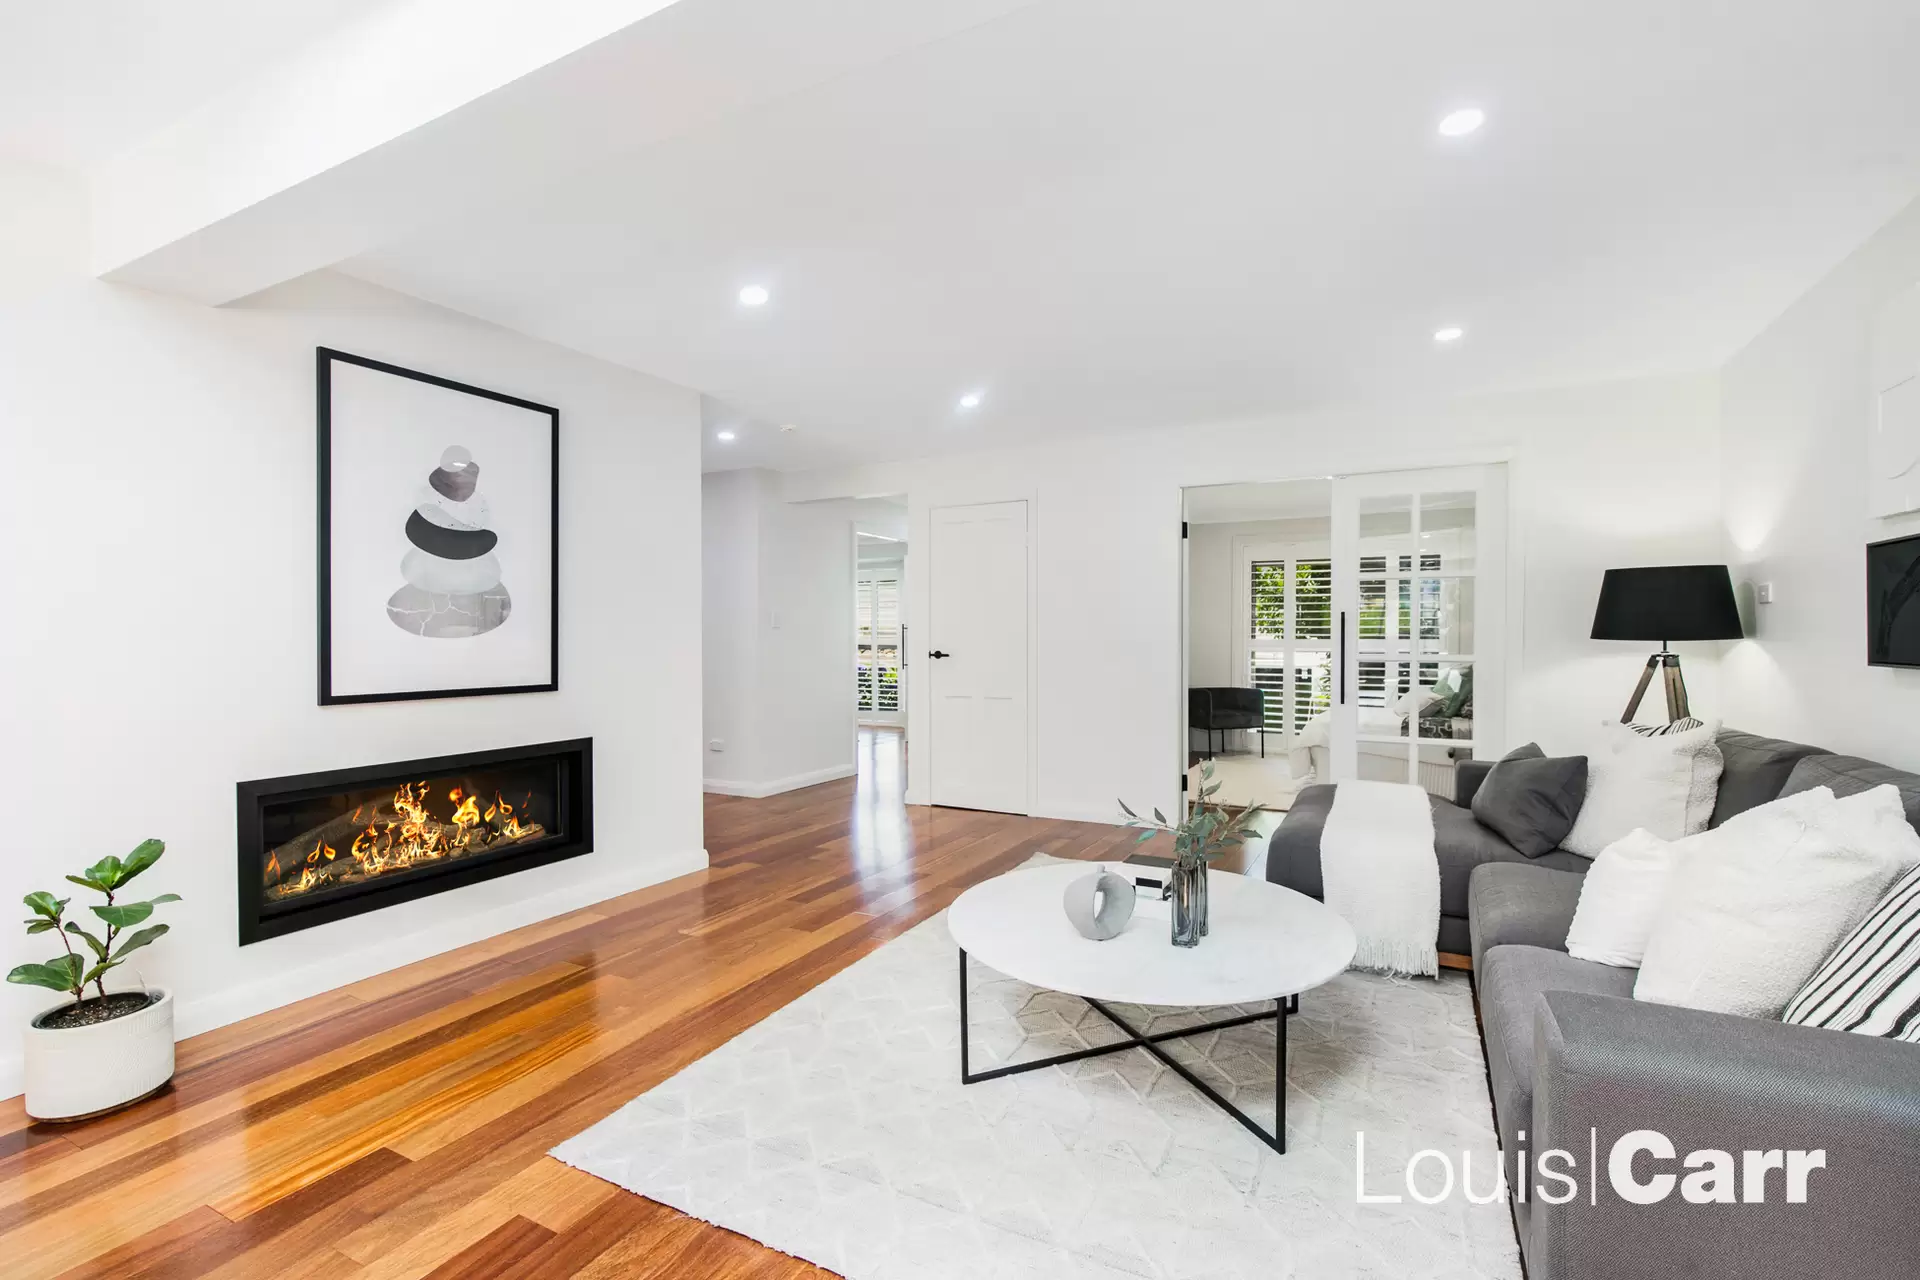 Photo #6: 38 Coonara Avenue, West Pennant Hills - Sold by Louis Carr Real Estate